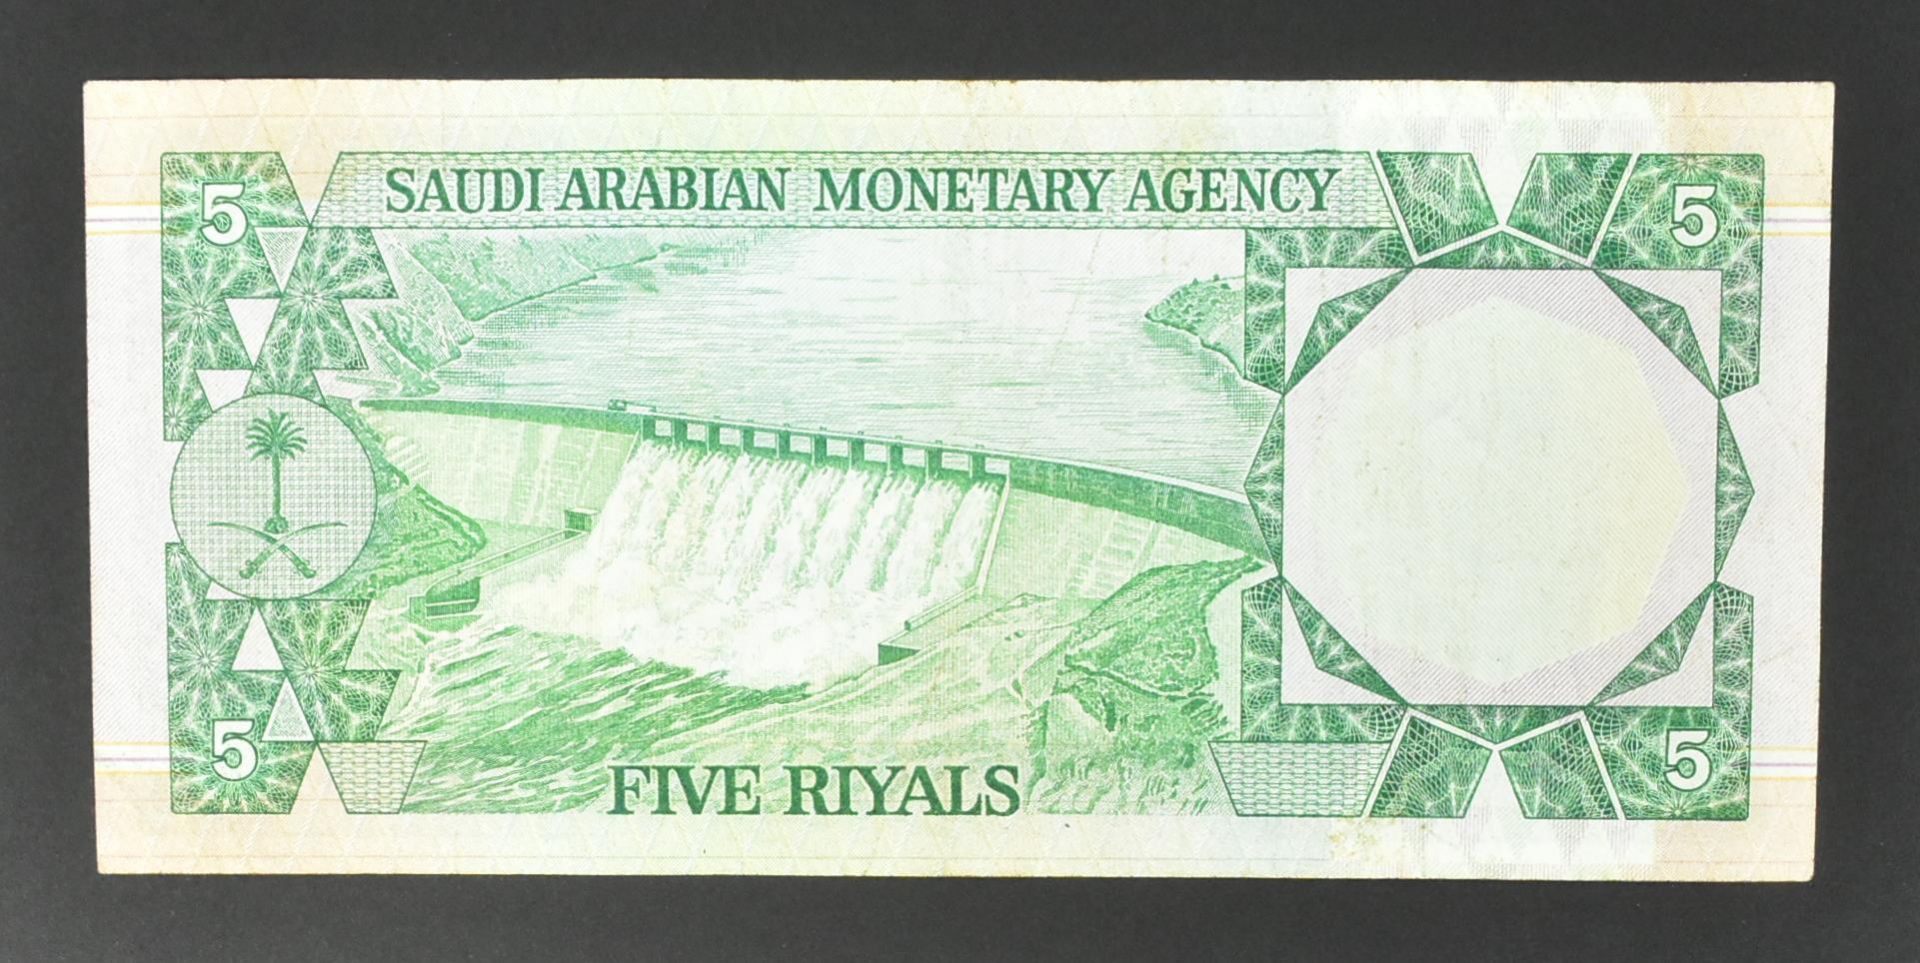 COLLECTION OF INTERNATIONAL UNCIRCULATED BANK NOTES - OMAN - Image 26 of 51